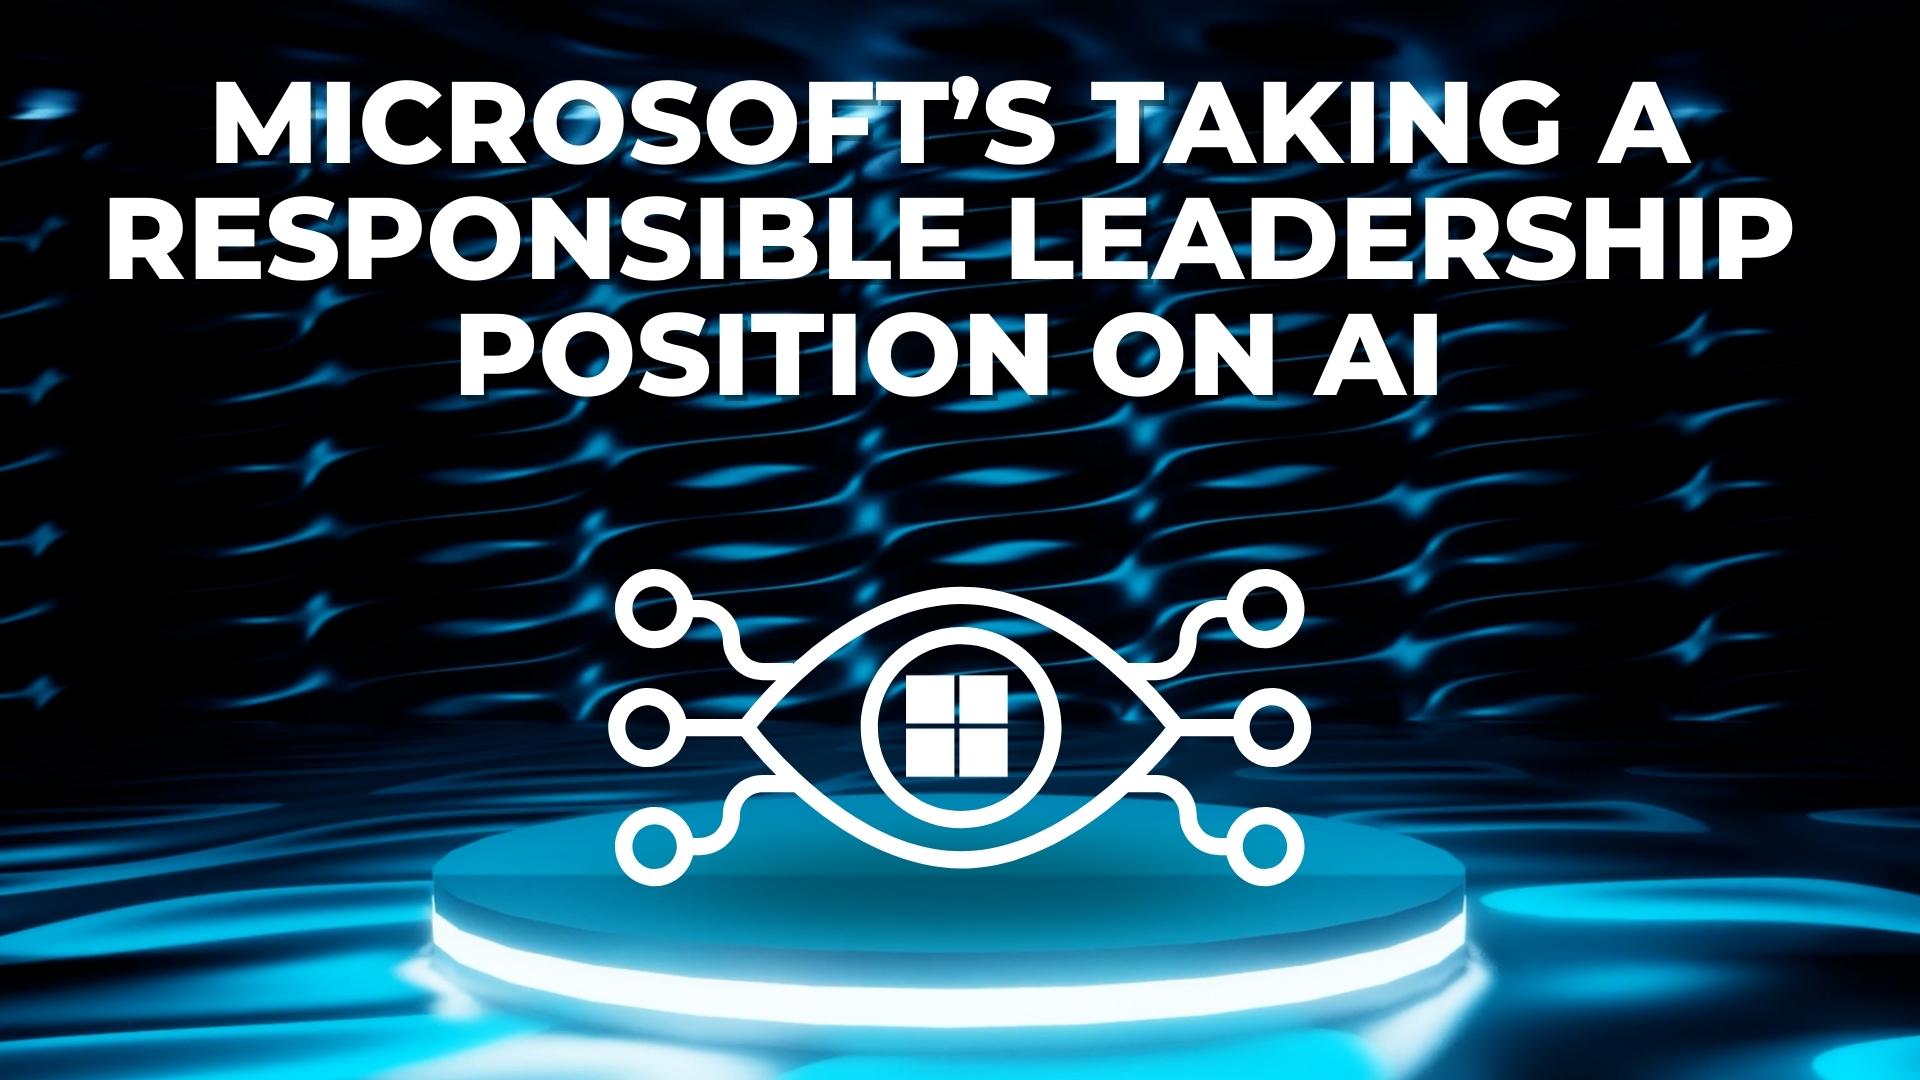 Microsoft’s taking a responsible leadership position on AI